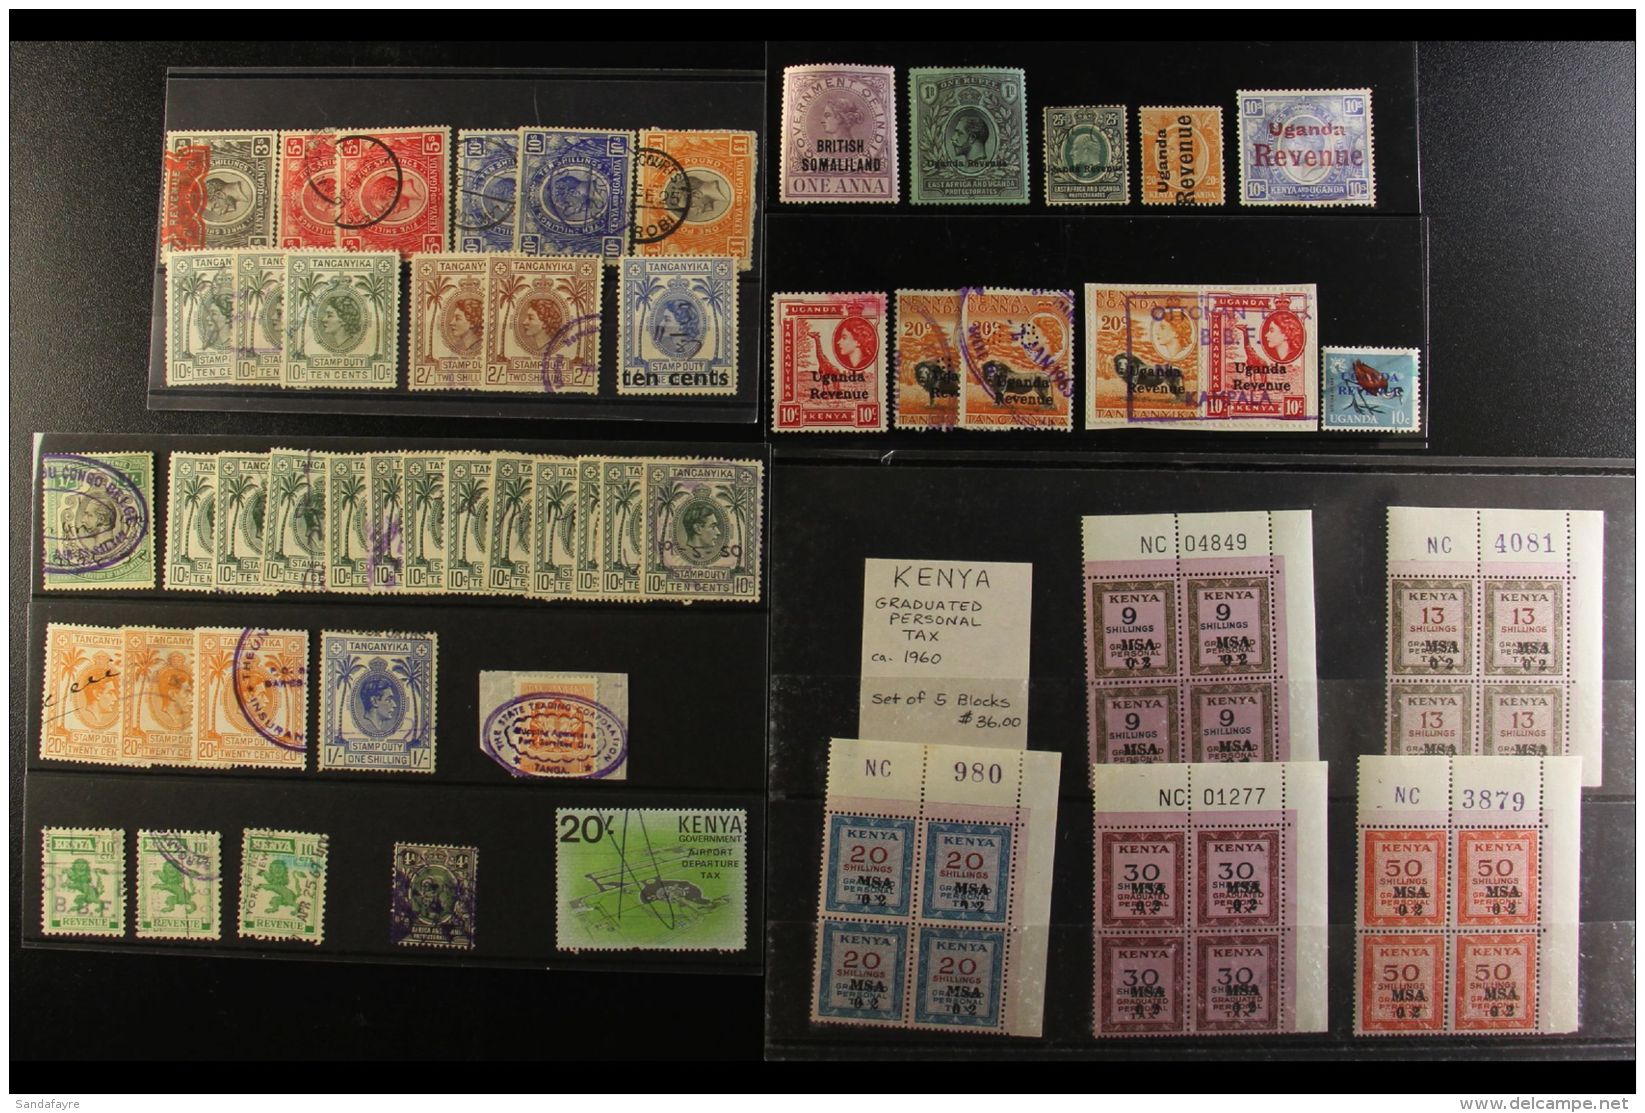 REVENUE STAMPS OF BRITISH EASTERN AFRICA Interesting Accumulation On Leaves And Stockcards. Note East Africa... - Vide